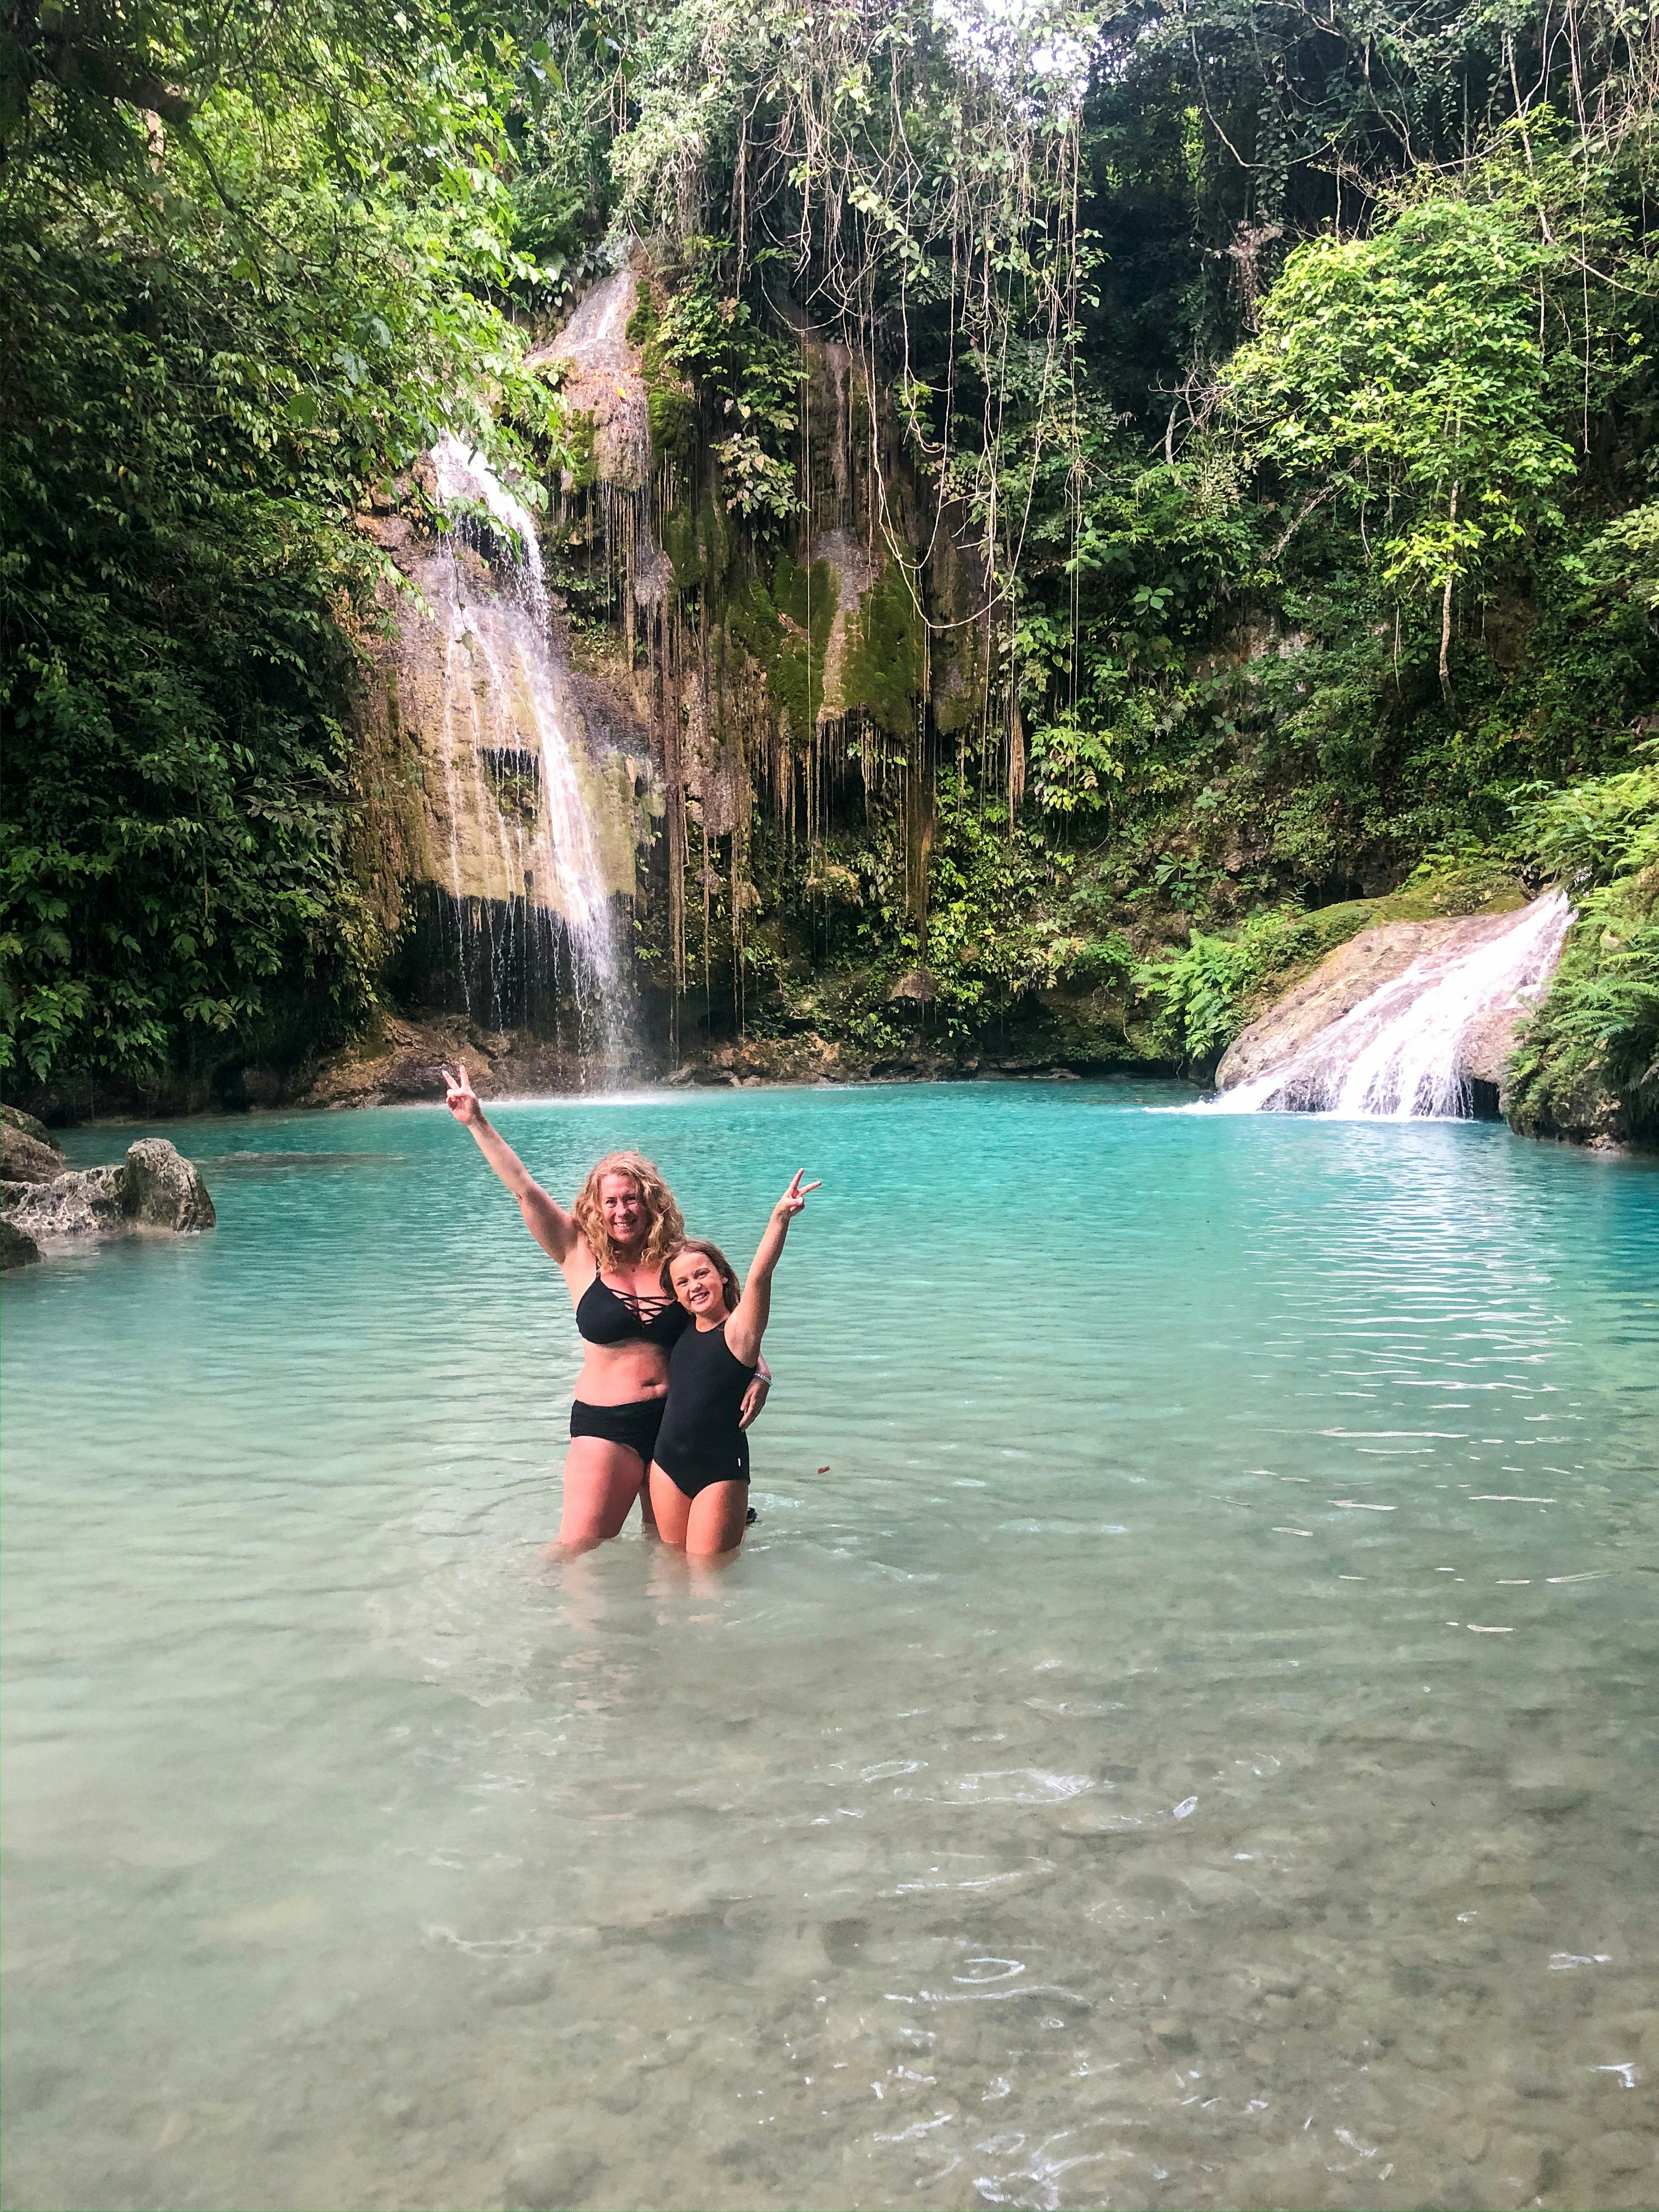 Evie and Emmie stand in the bright turquoise natural pool at picturesque Cambias Falls, Cebu.